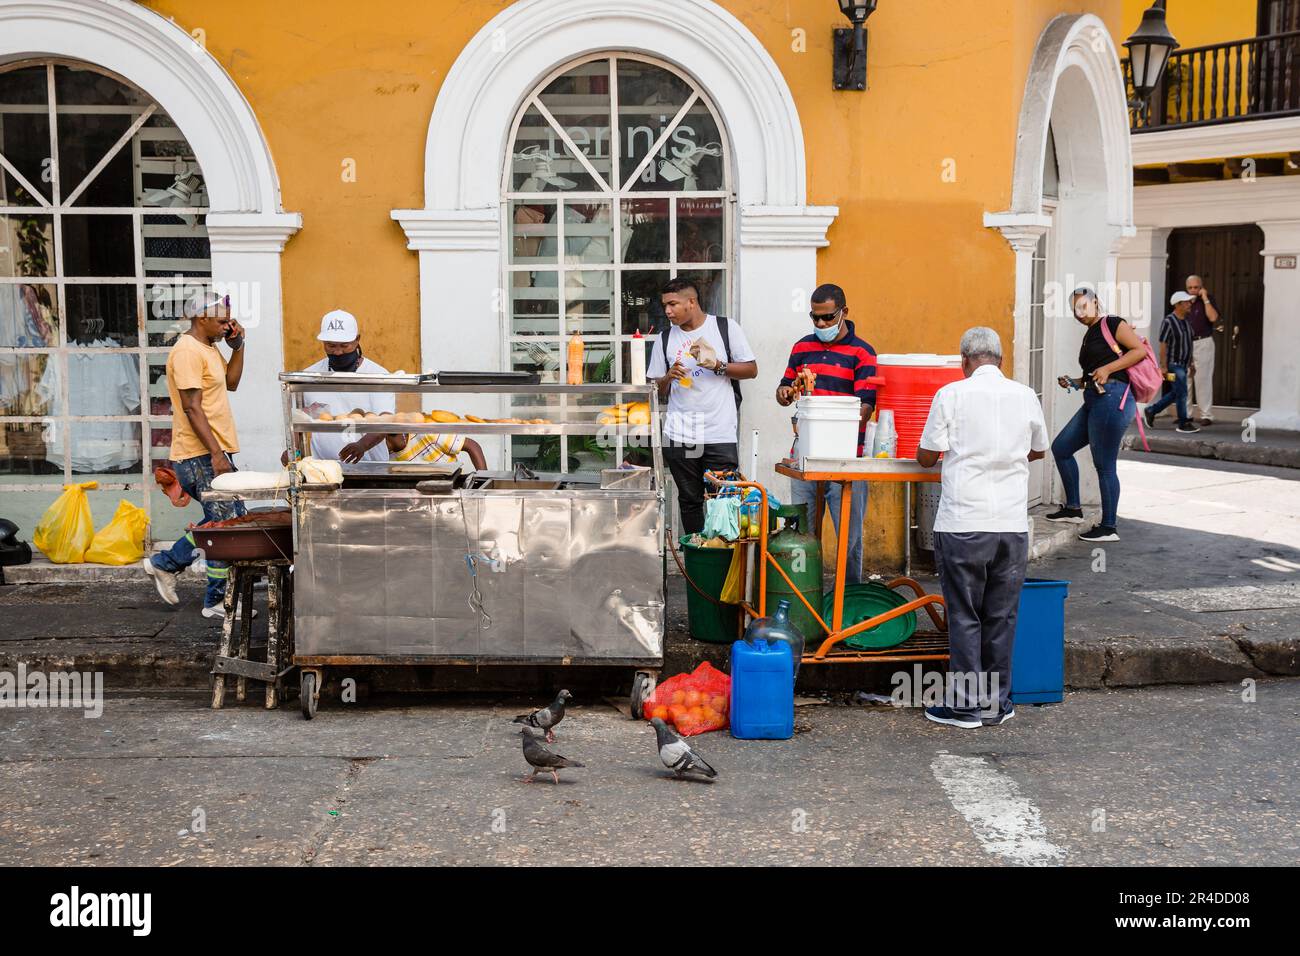 People gather near a street food cart in the old town of Cartagena Colombia Stock Photo